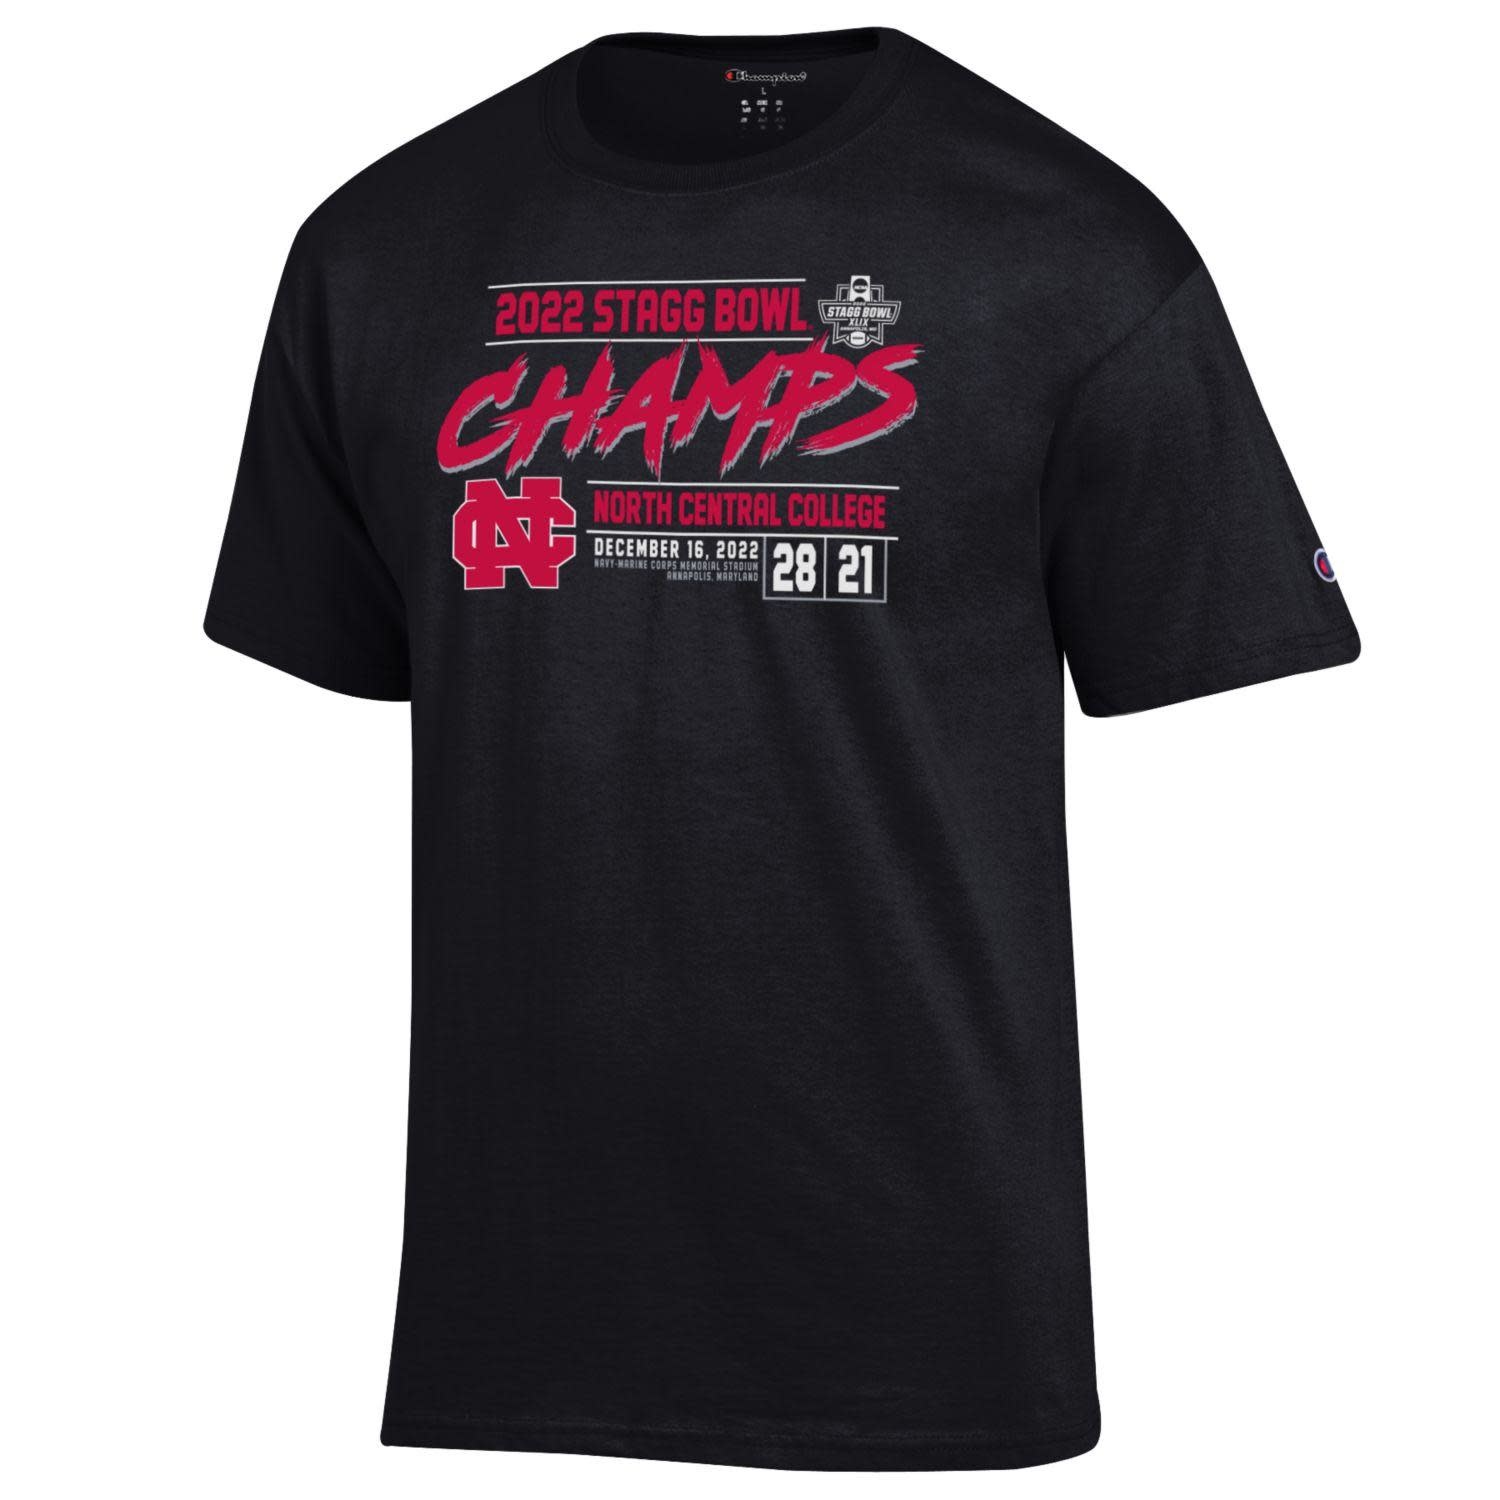 2022 Official Stagg Bowl Champions Locker Room Tee - North Central College  Campus Store